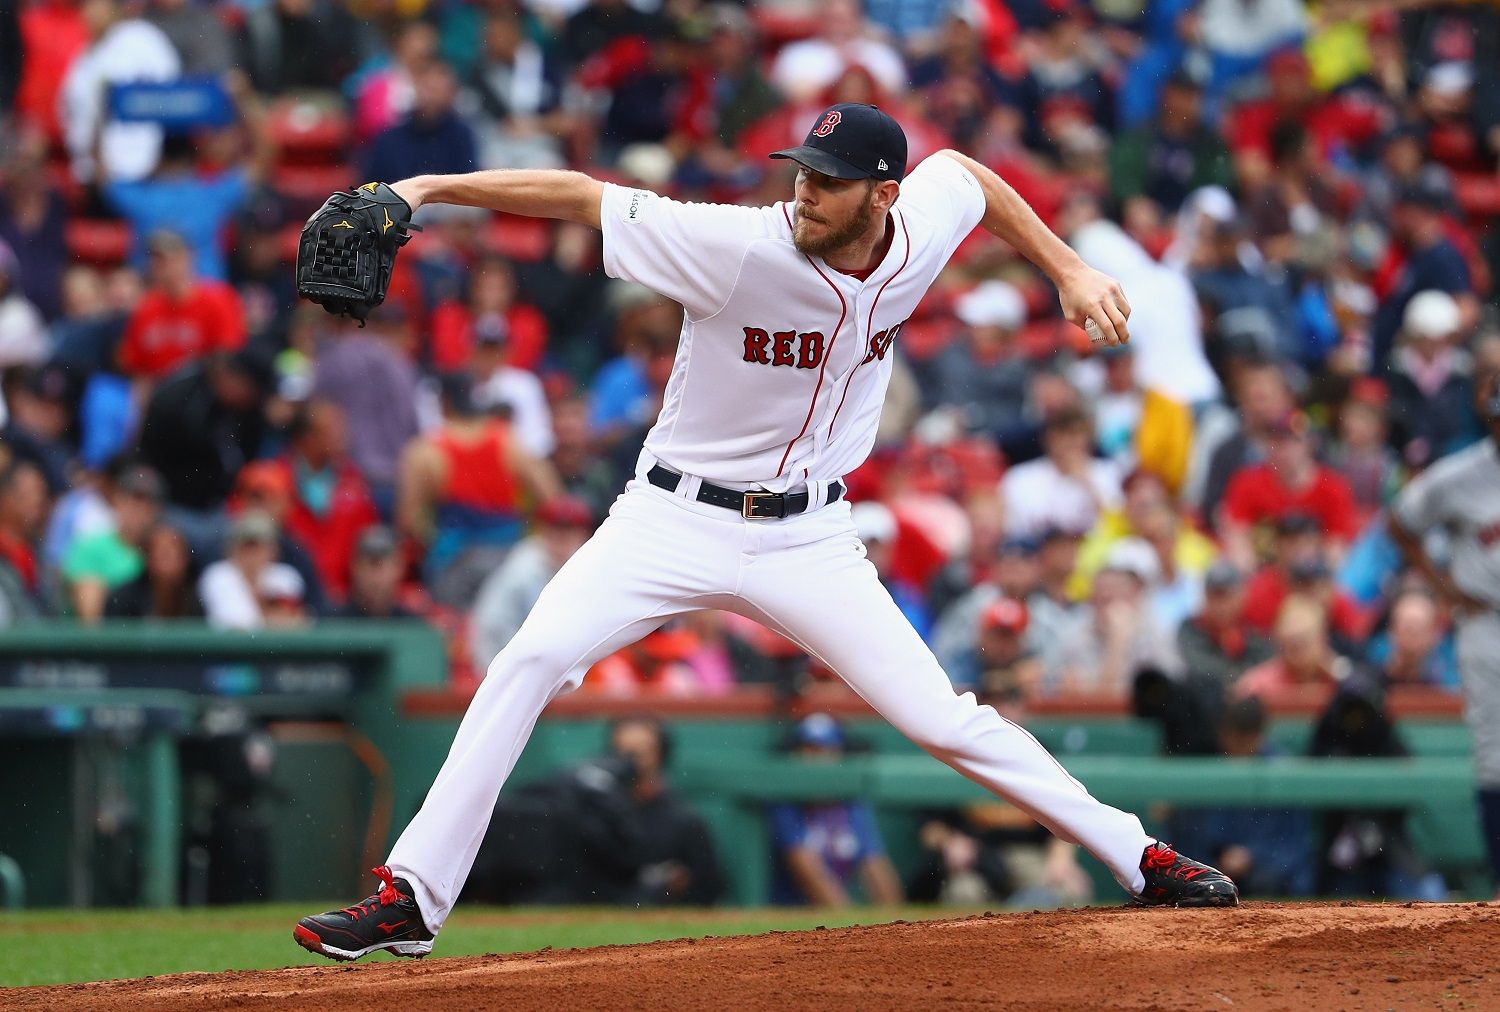 BOSTON, MA - OCTOBER 09:  Chris Sale #41 of the Boston Red Sox throws a pitch in the fourth inning against the Houston Astros during game four of the American League Division Series at Fenway Park on October 9, 2017 in Boston, Massachusetts.  (Photo by Maddie Meyer/Getty Images)